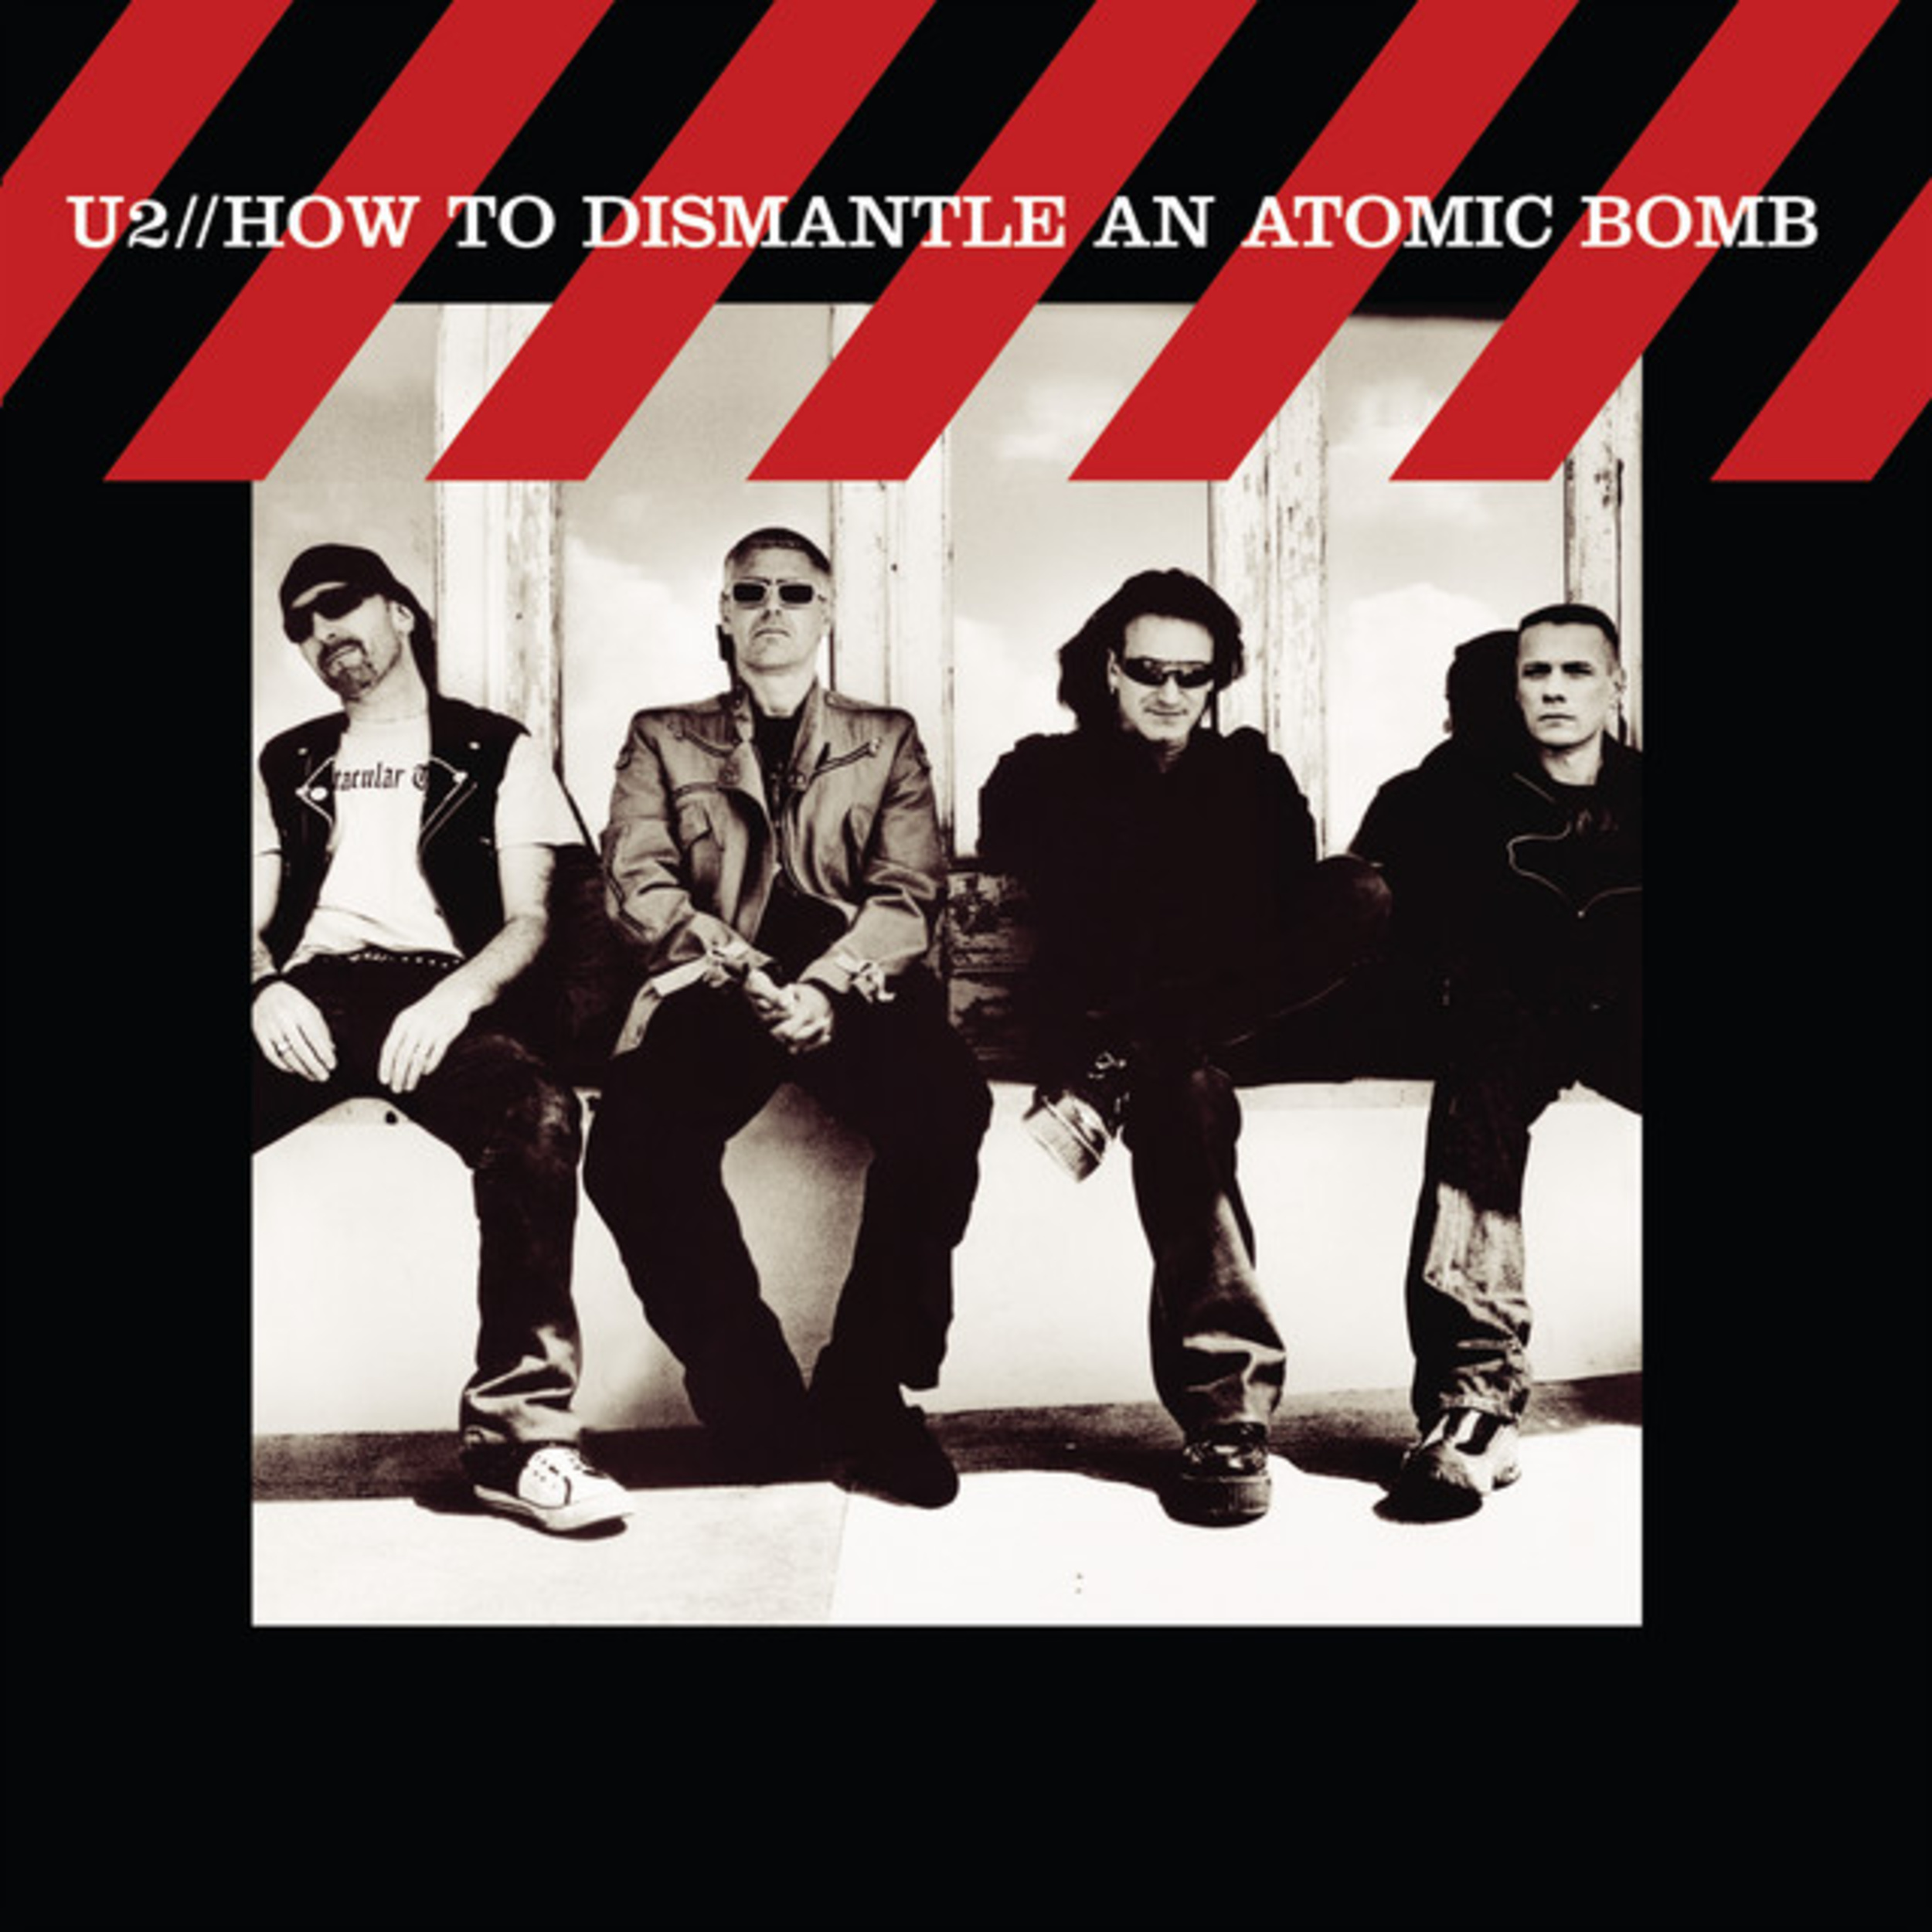 <p>Rock band U2 had one of the year's best-selling albums, <em>How to Dismantle an Atomic Bomb.</em> In its first week of being released, the album sold over 800,000 copies, which also goes to show how the early 2000s was a sign of the times of having tangible copies of albums. Hit singles like "City of Blinding Lights" and <a href="https://www.youtube.com/watch?v=98W9QuMq-2k">"Vertigo"</a> helped the group earn Grammy Awards for Best Rock Song and Best Rock Album. </p><p><a href='https://www.msn.com/en-us/community/channel/vid-cj9pqbr0vn9in2b6ddcd8sfgpfq6x6utp44fssrv6mc2gtybw0us'>Follow us on MSN to see more of our exclusive entertainment content.</a></p>